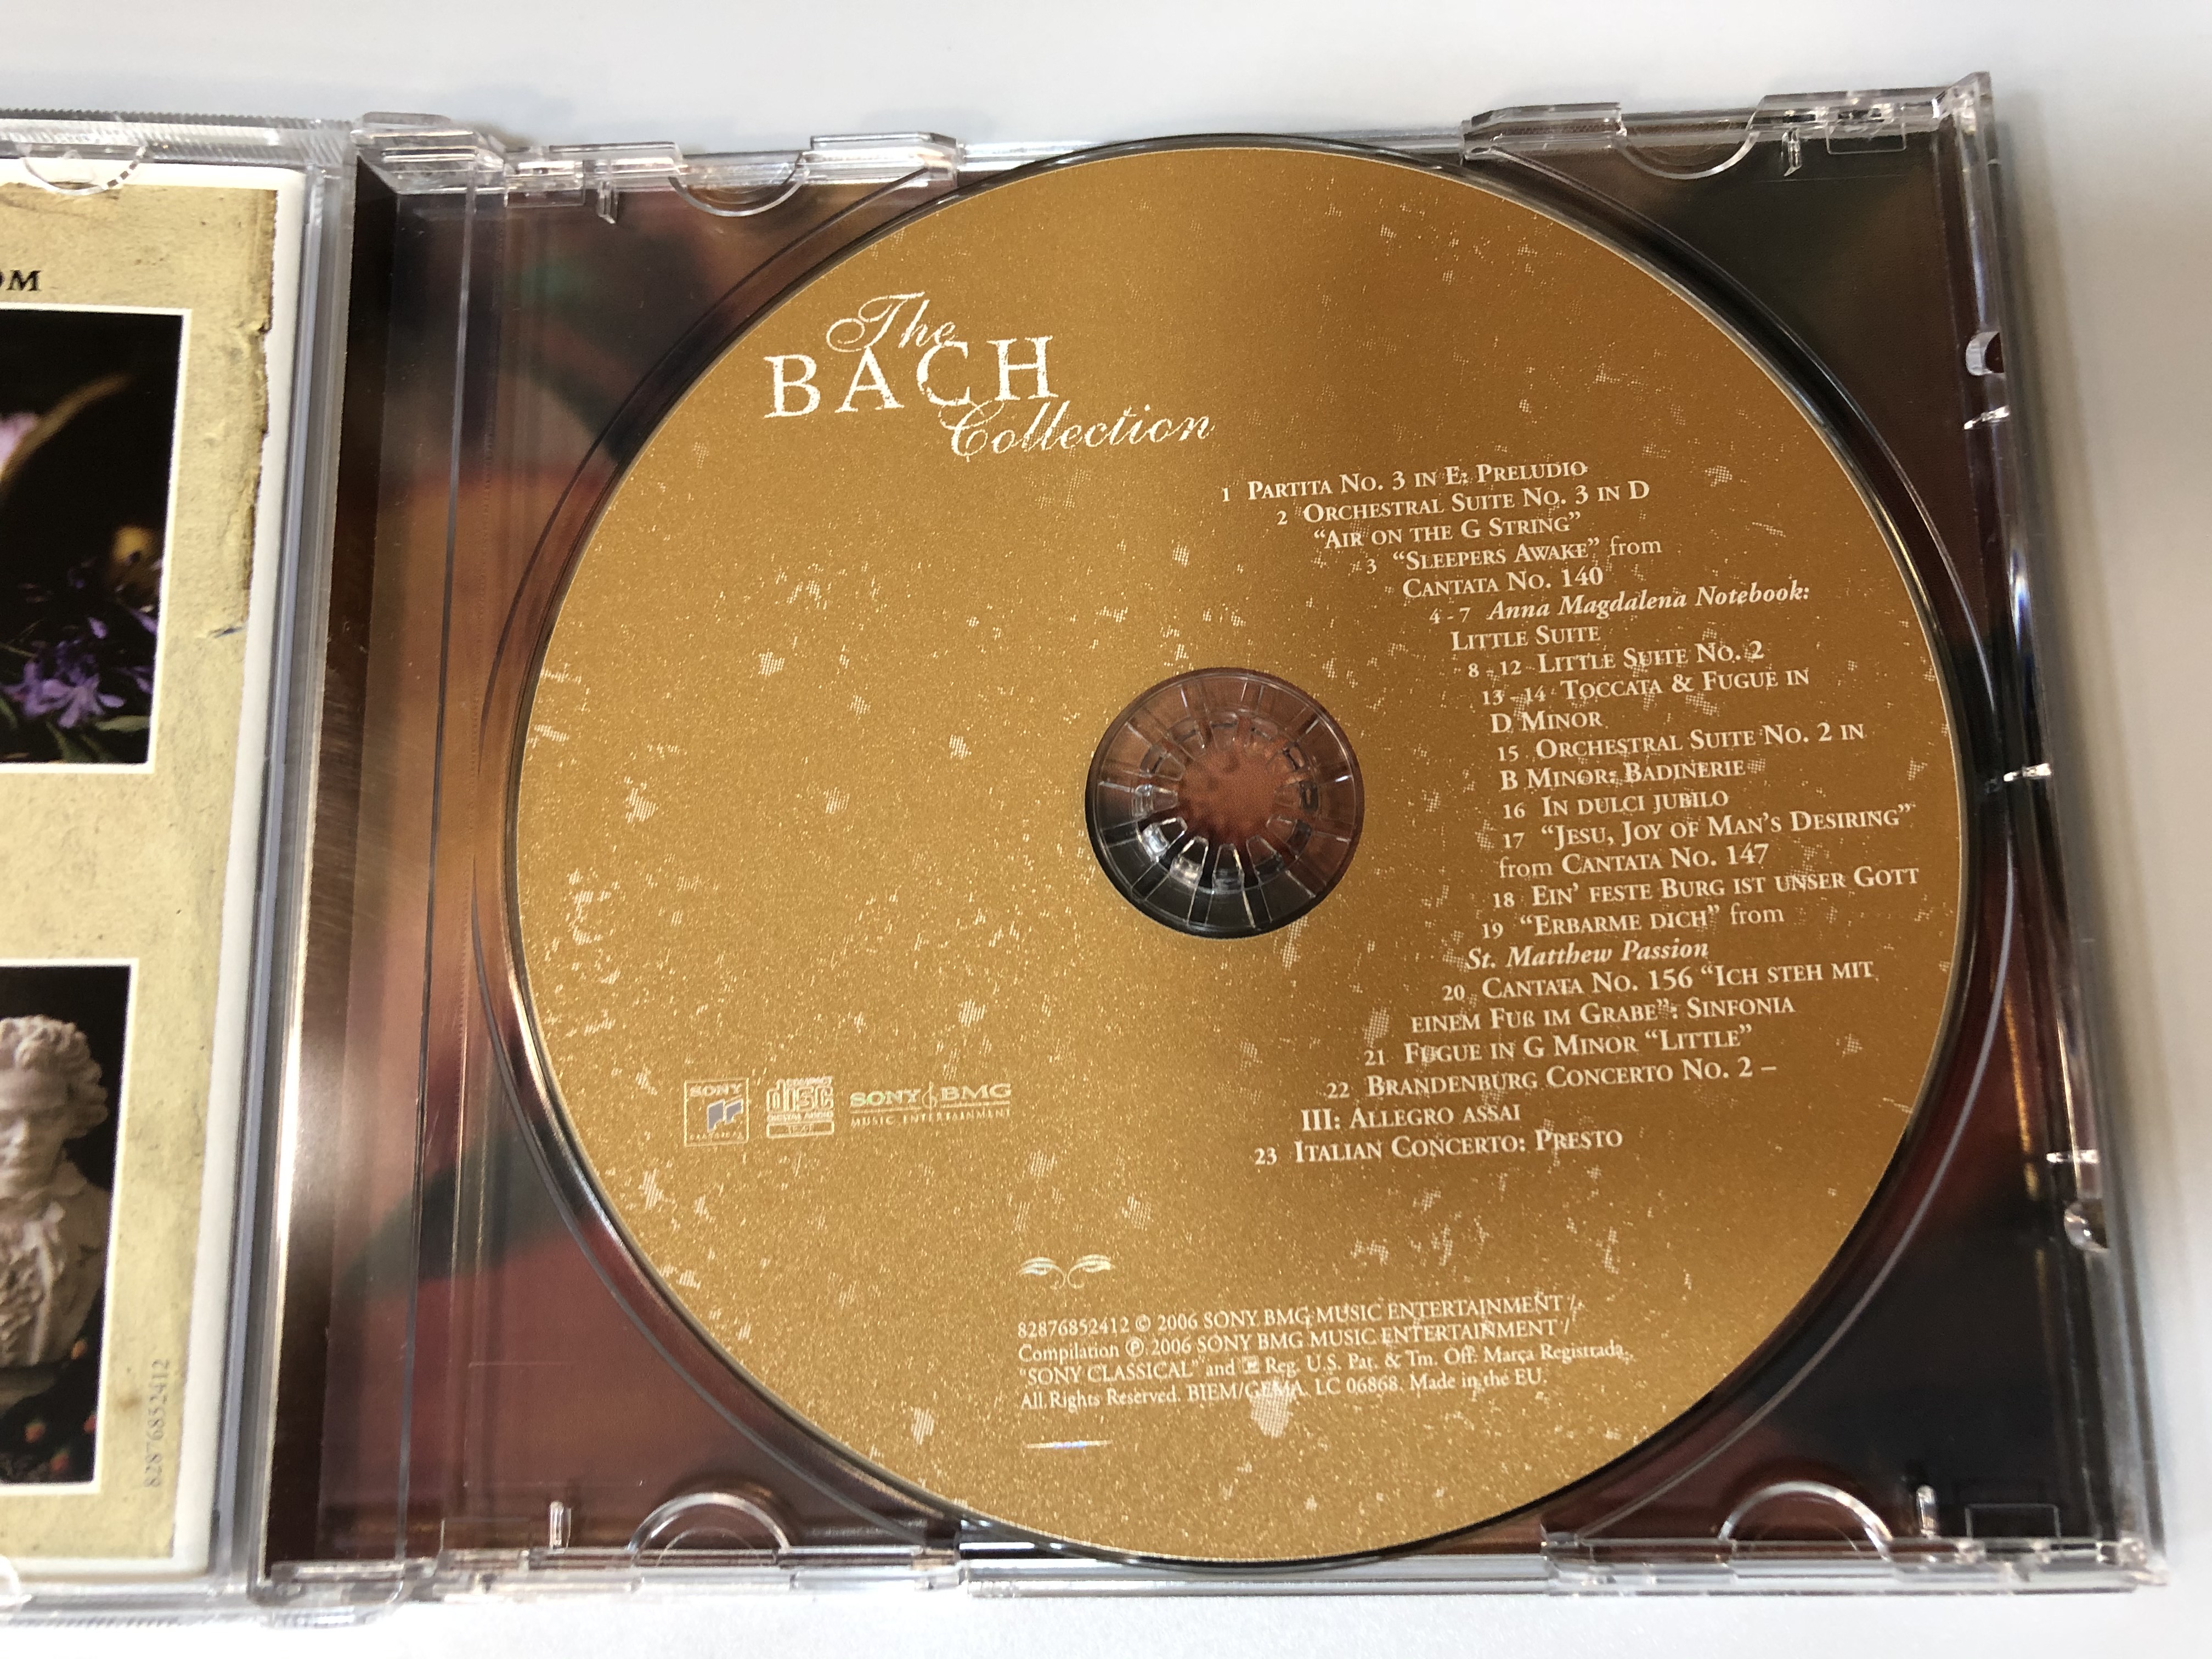 the-bach-collection-sony-classical-audio-cd-2006-82876852412-4-.jpg